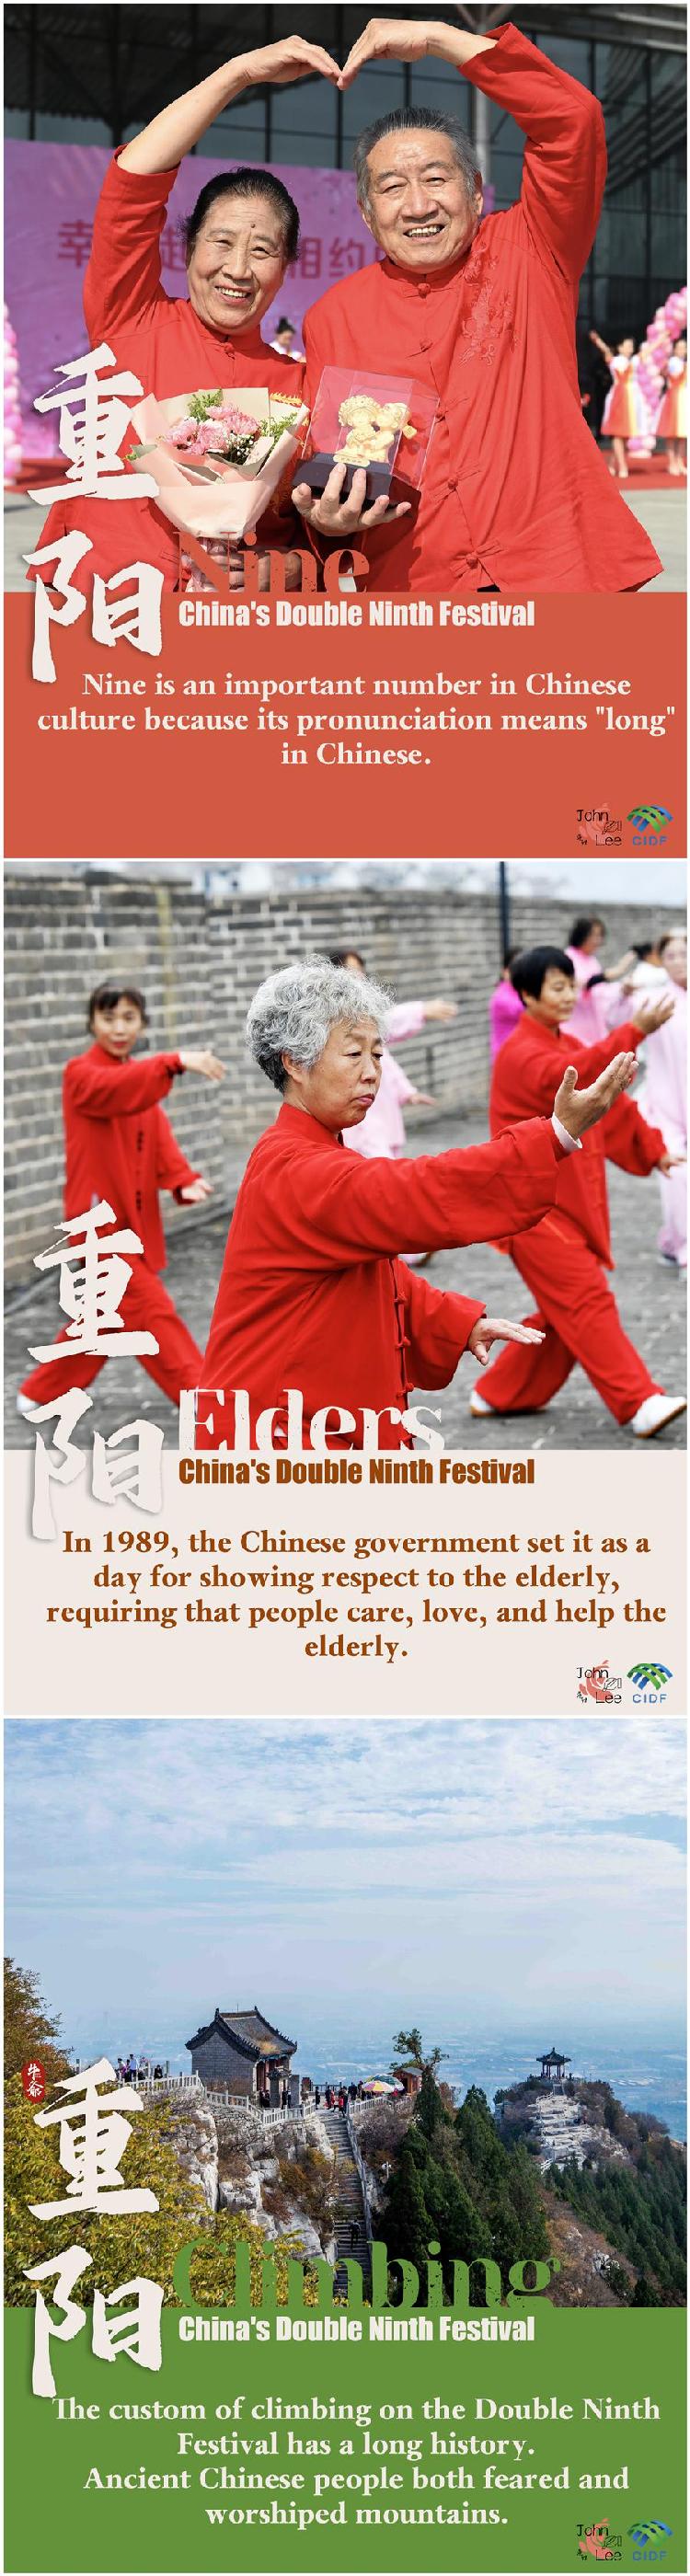 Culture fact: keywords in Chinas Double Ninth Festival